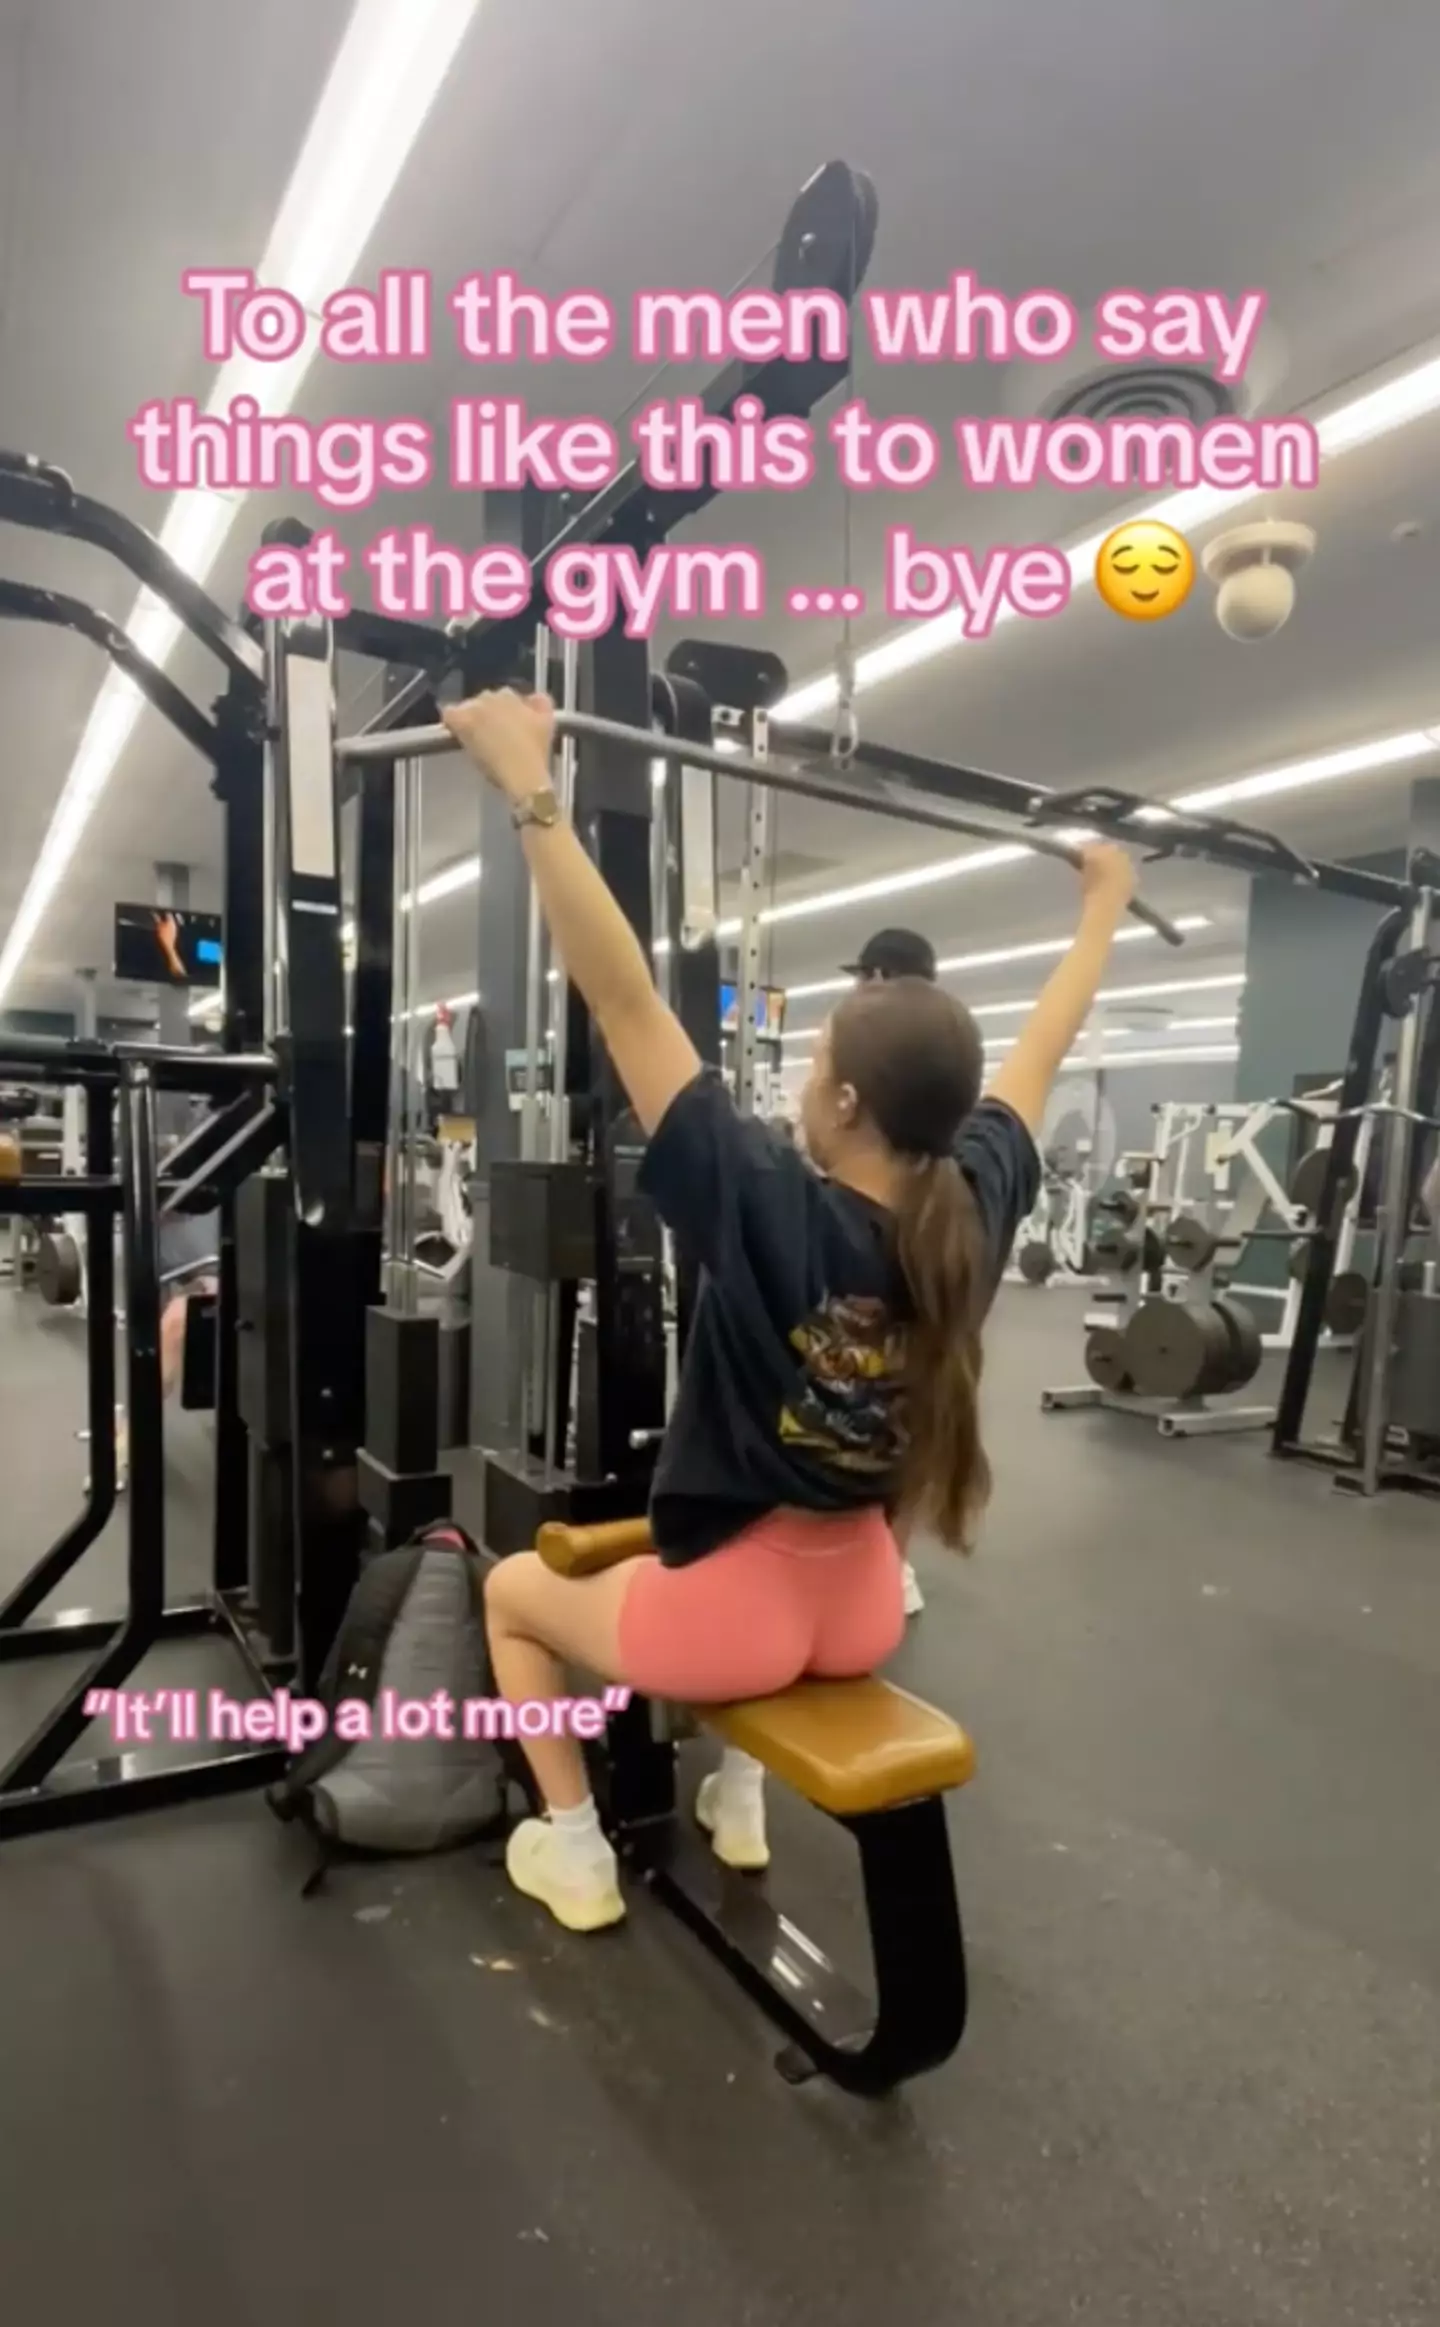 Oh for someone to be able to go to the gym and workout in peace.